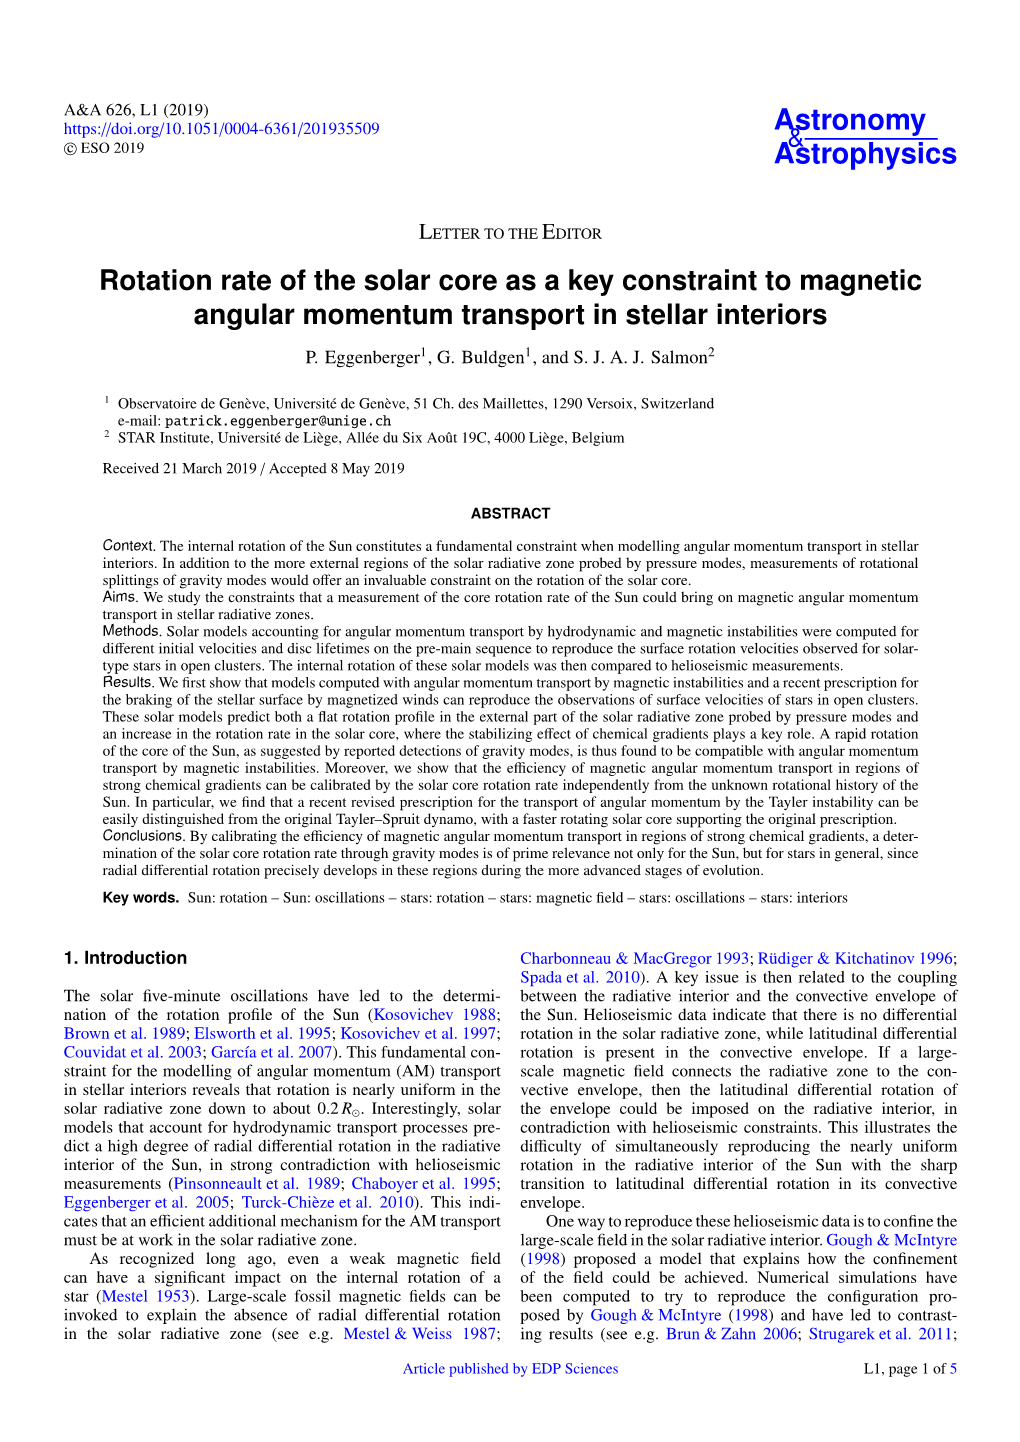 Rotation Rate of the Solar Core As a Key Constraint to Magnetic Angular Momentum Transport in Stellar Interiors P